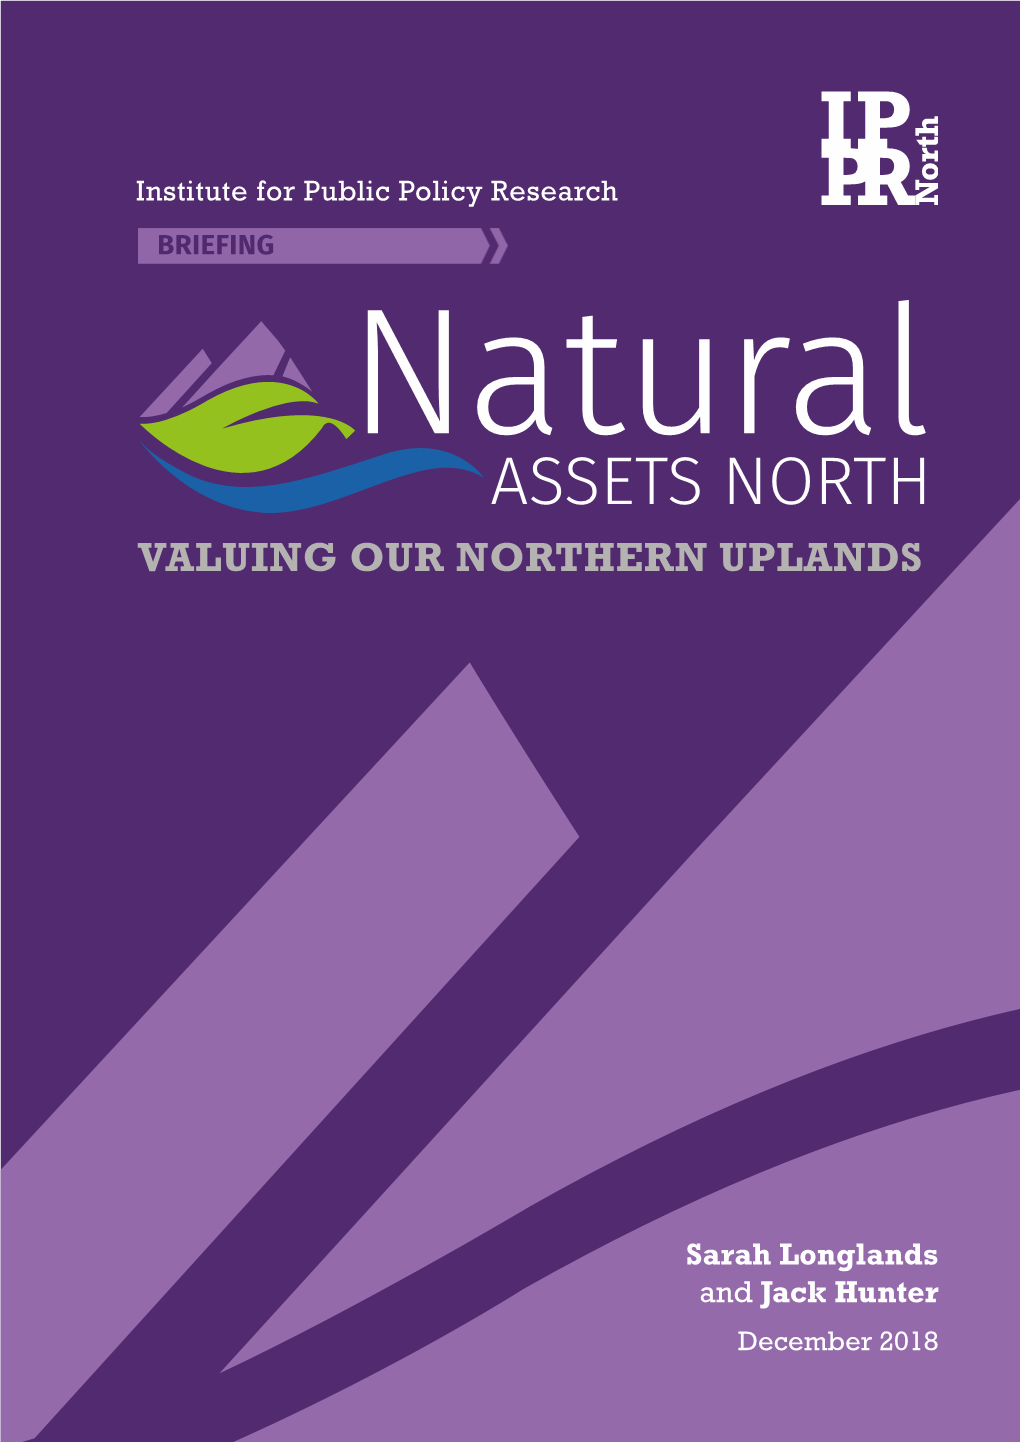 Valuing Our Northern Uplands